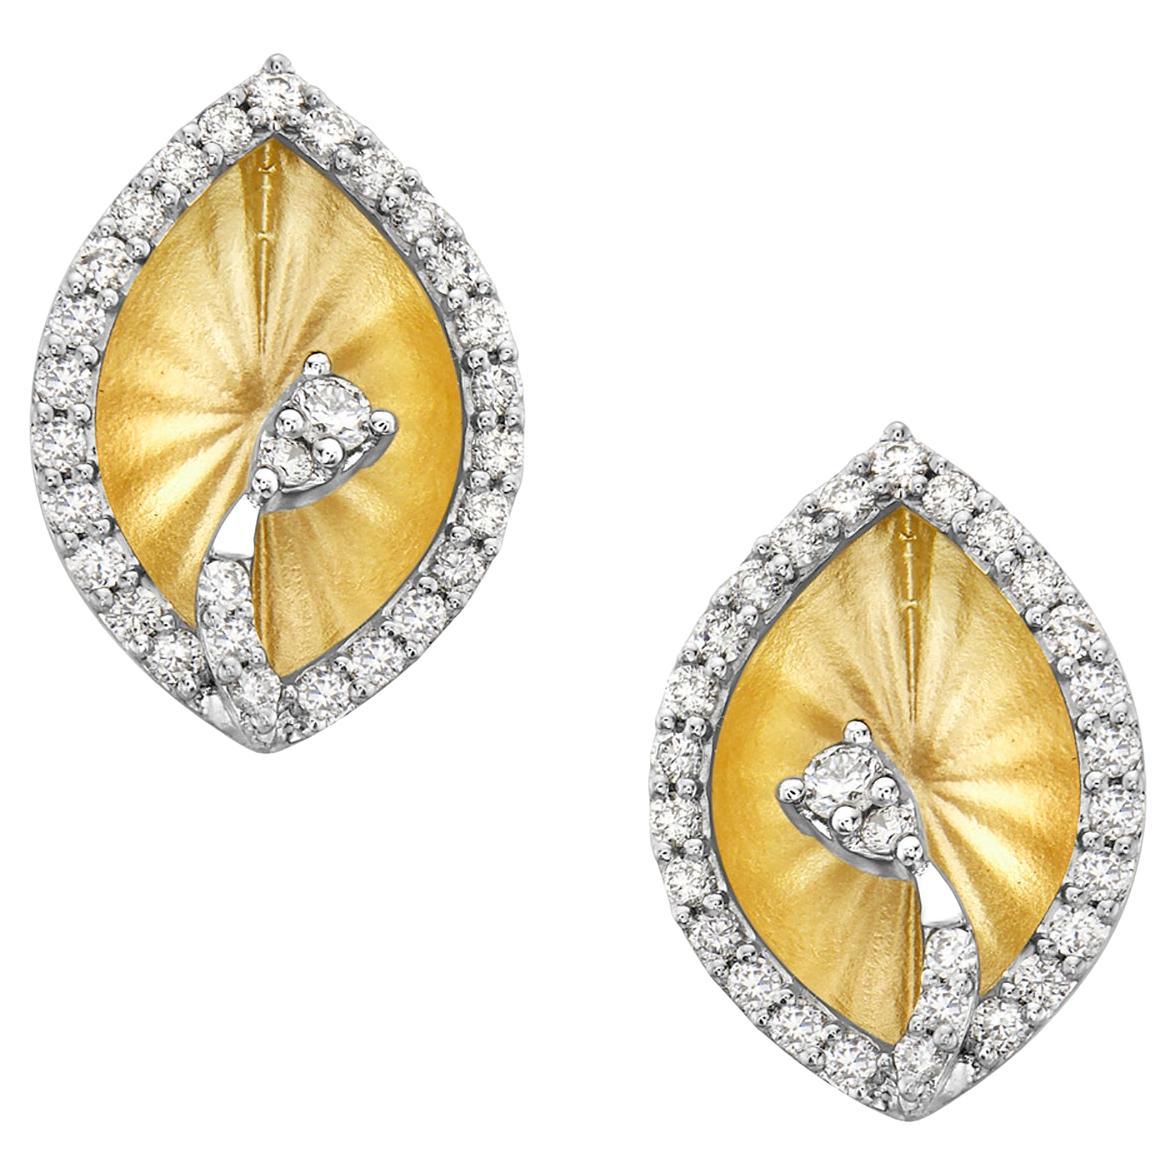 Pear Shaped Carved Stud Earrings Made in 14k Yellow Gold with Diamonds on Border For Sale